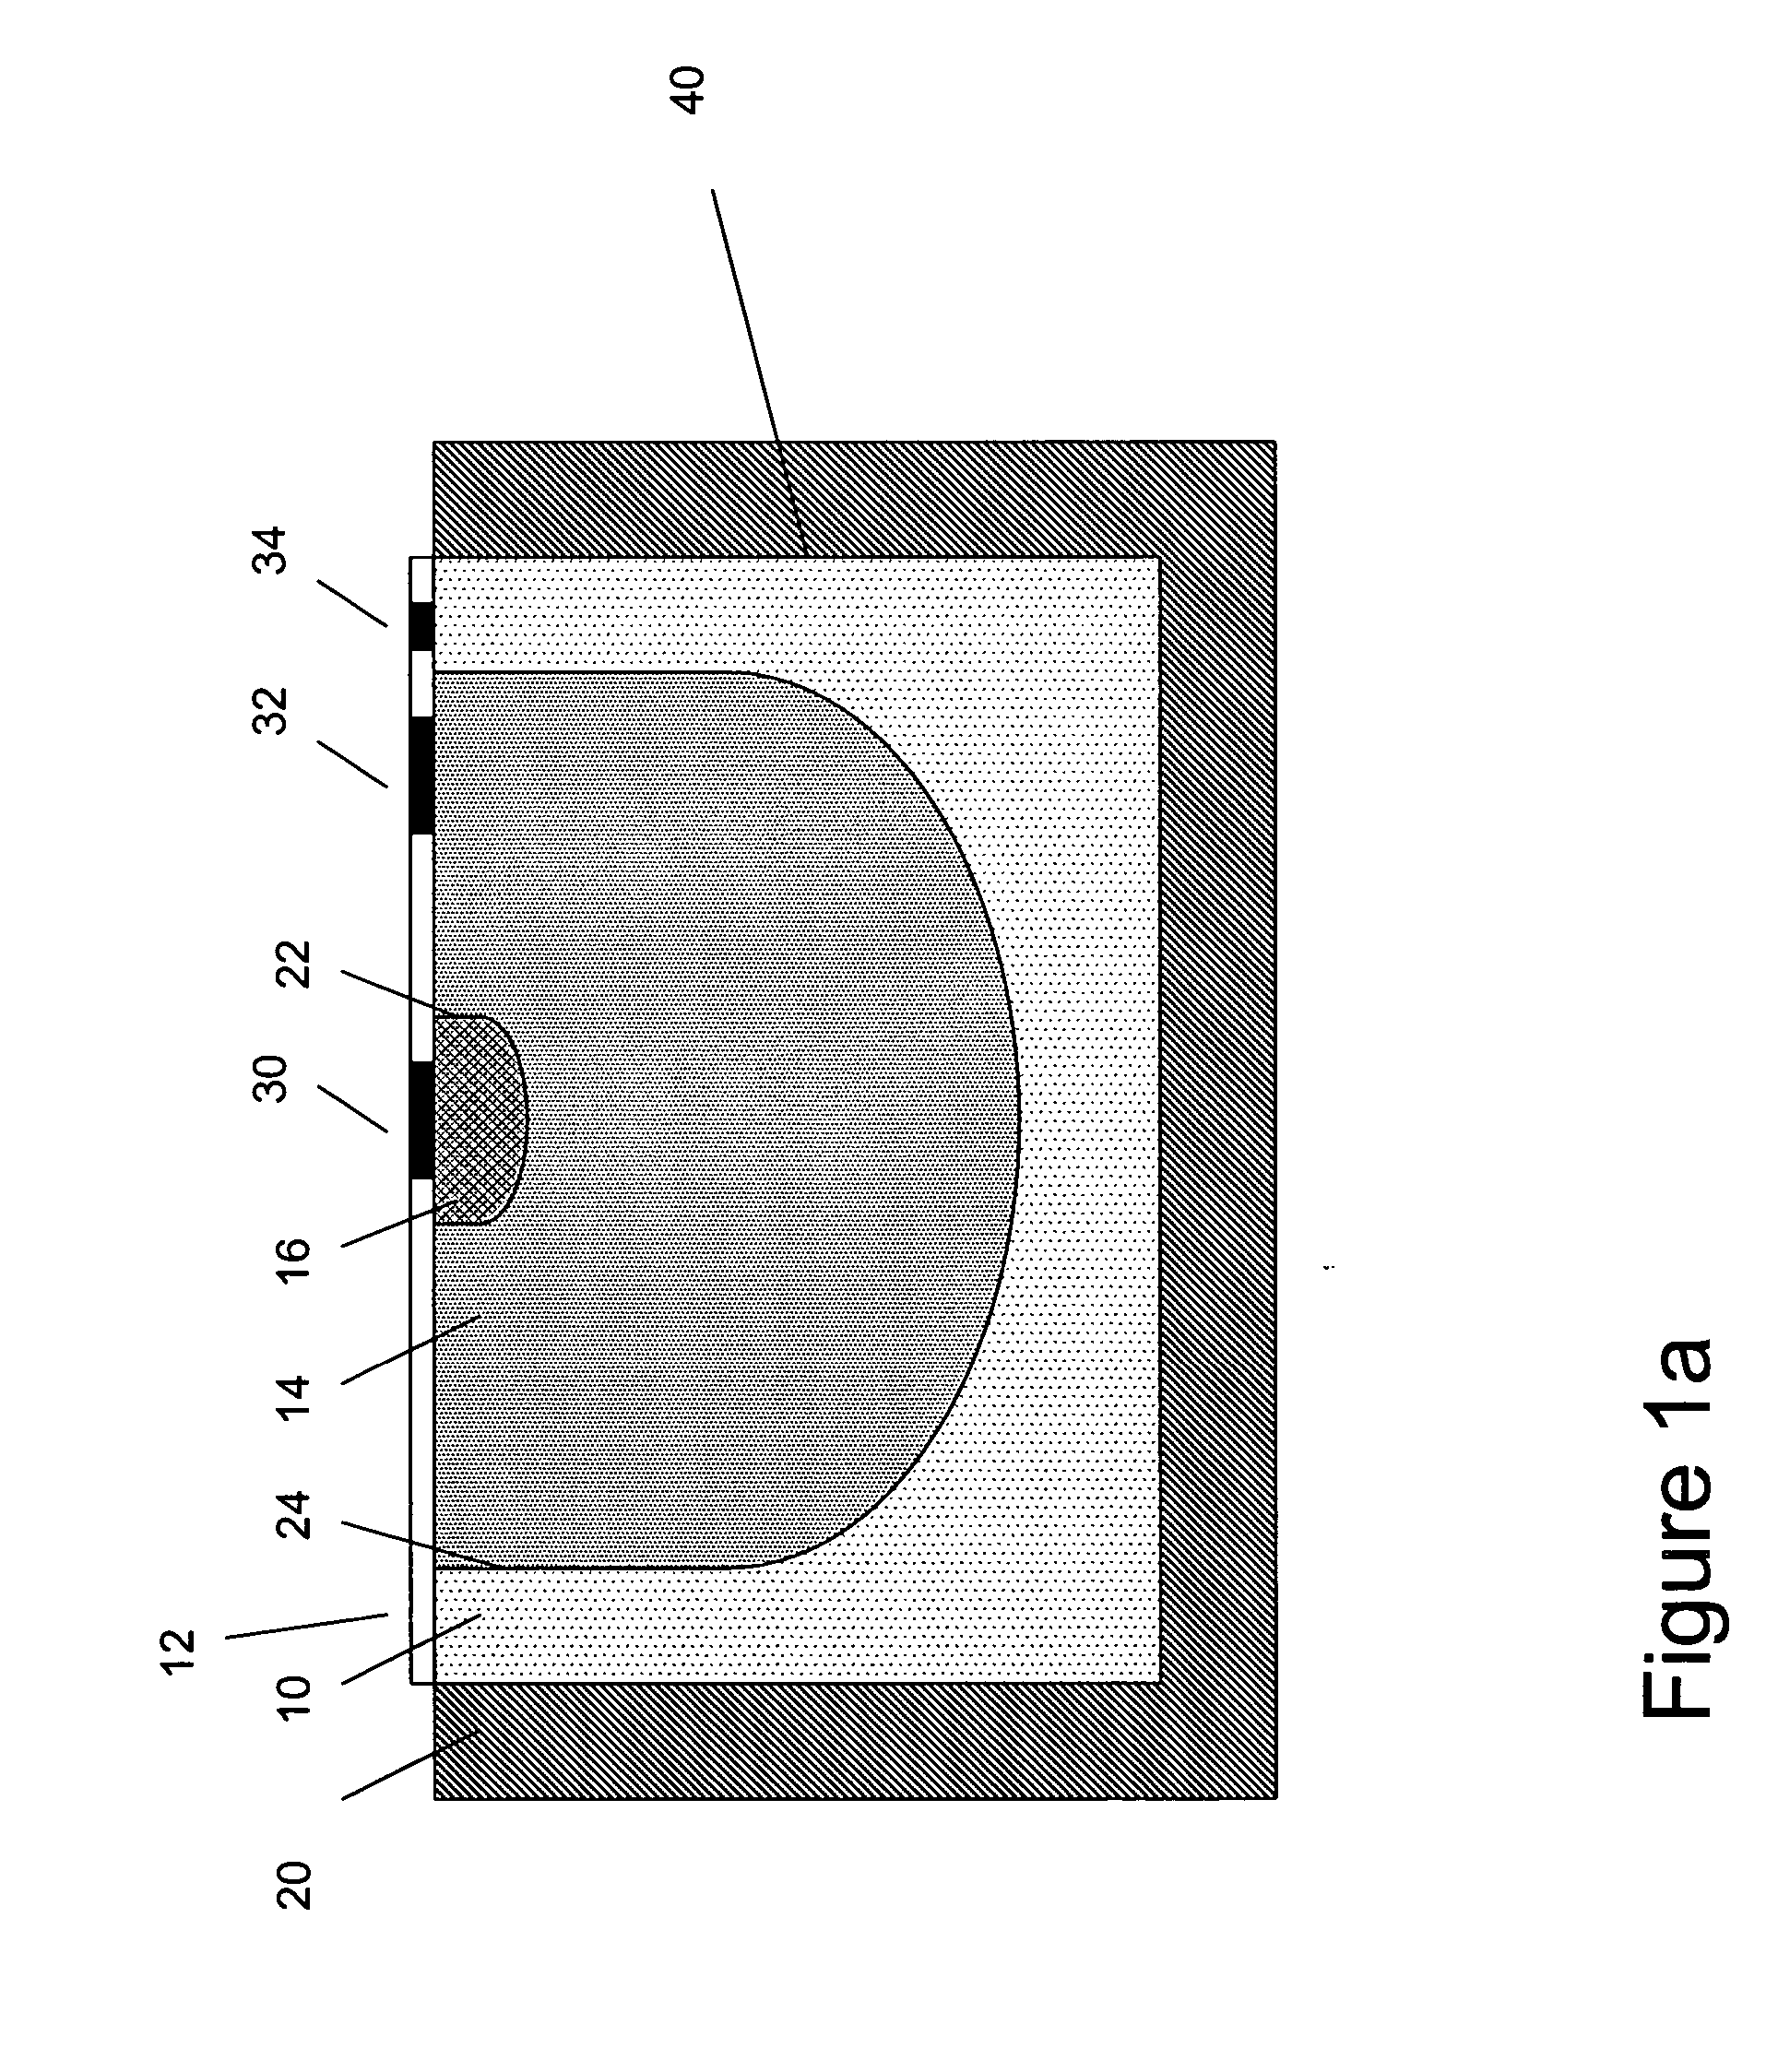 Low-noise semiconductor photodetectors